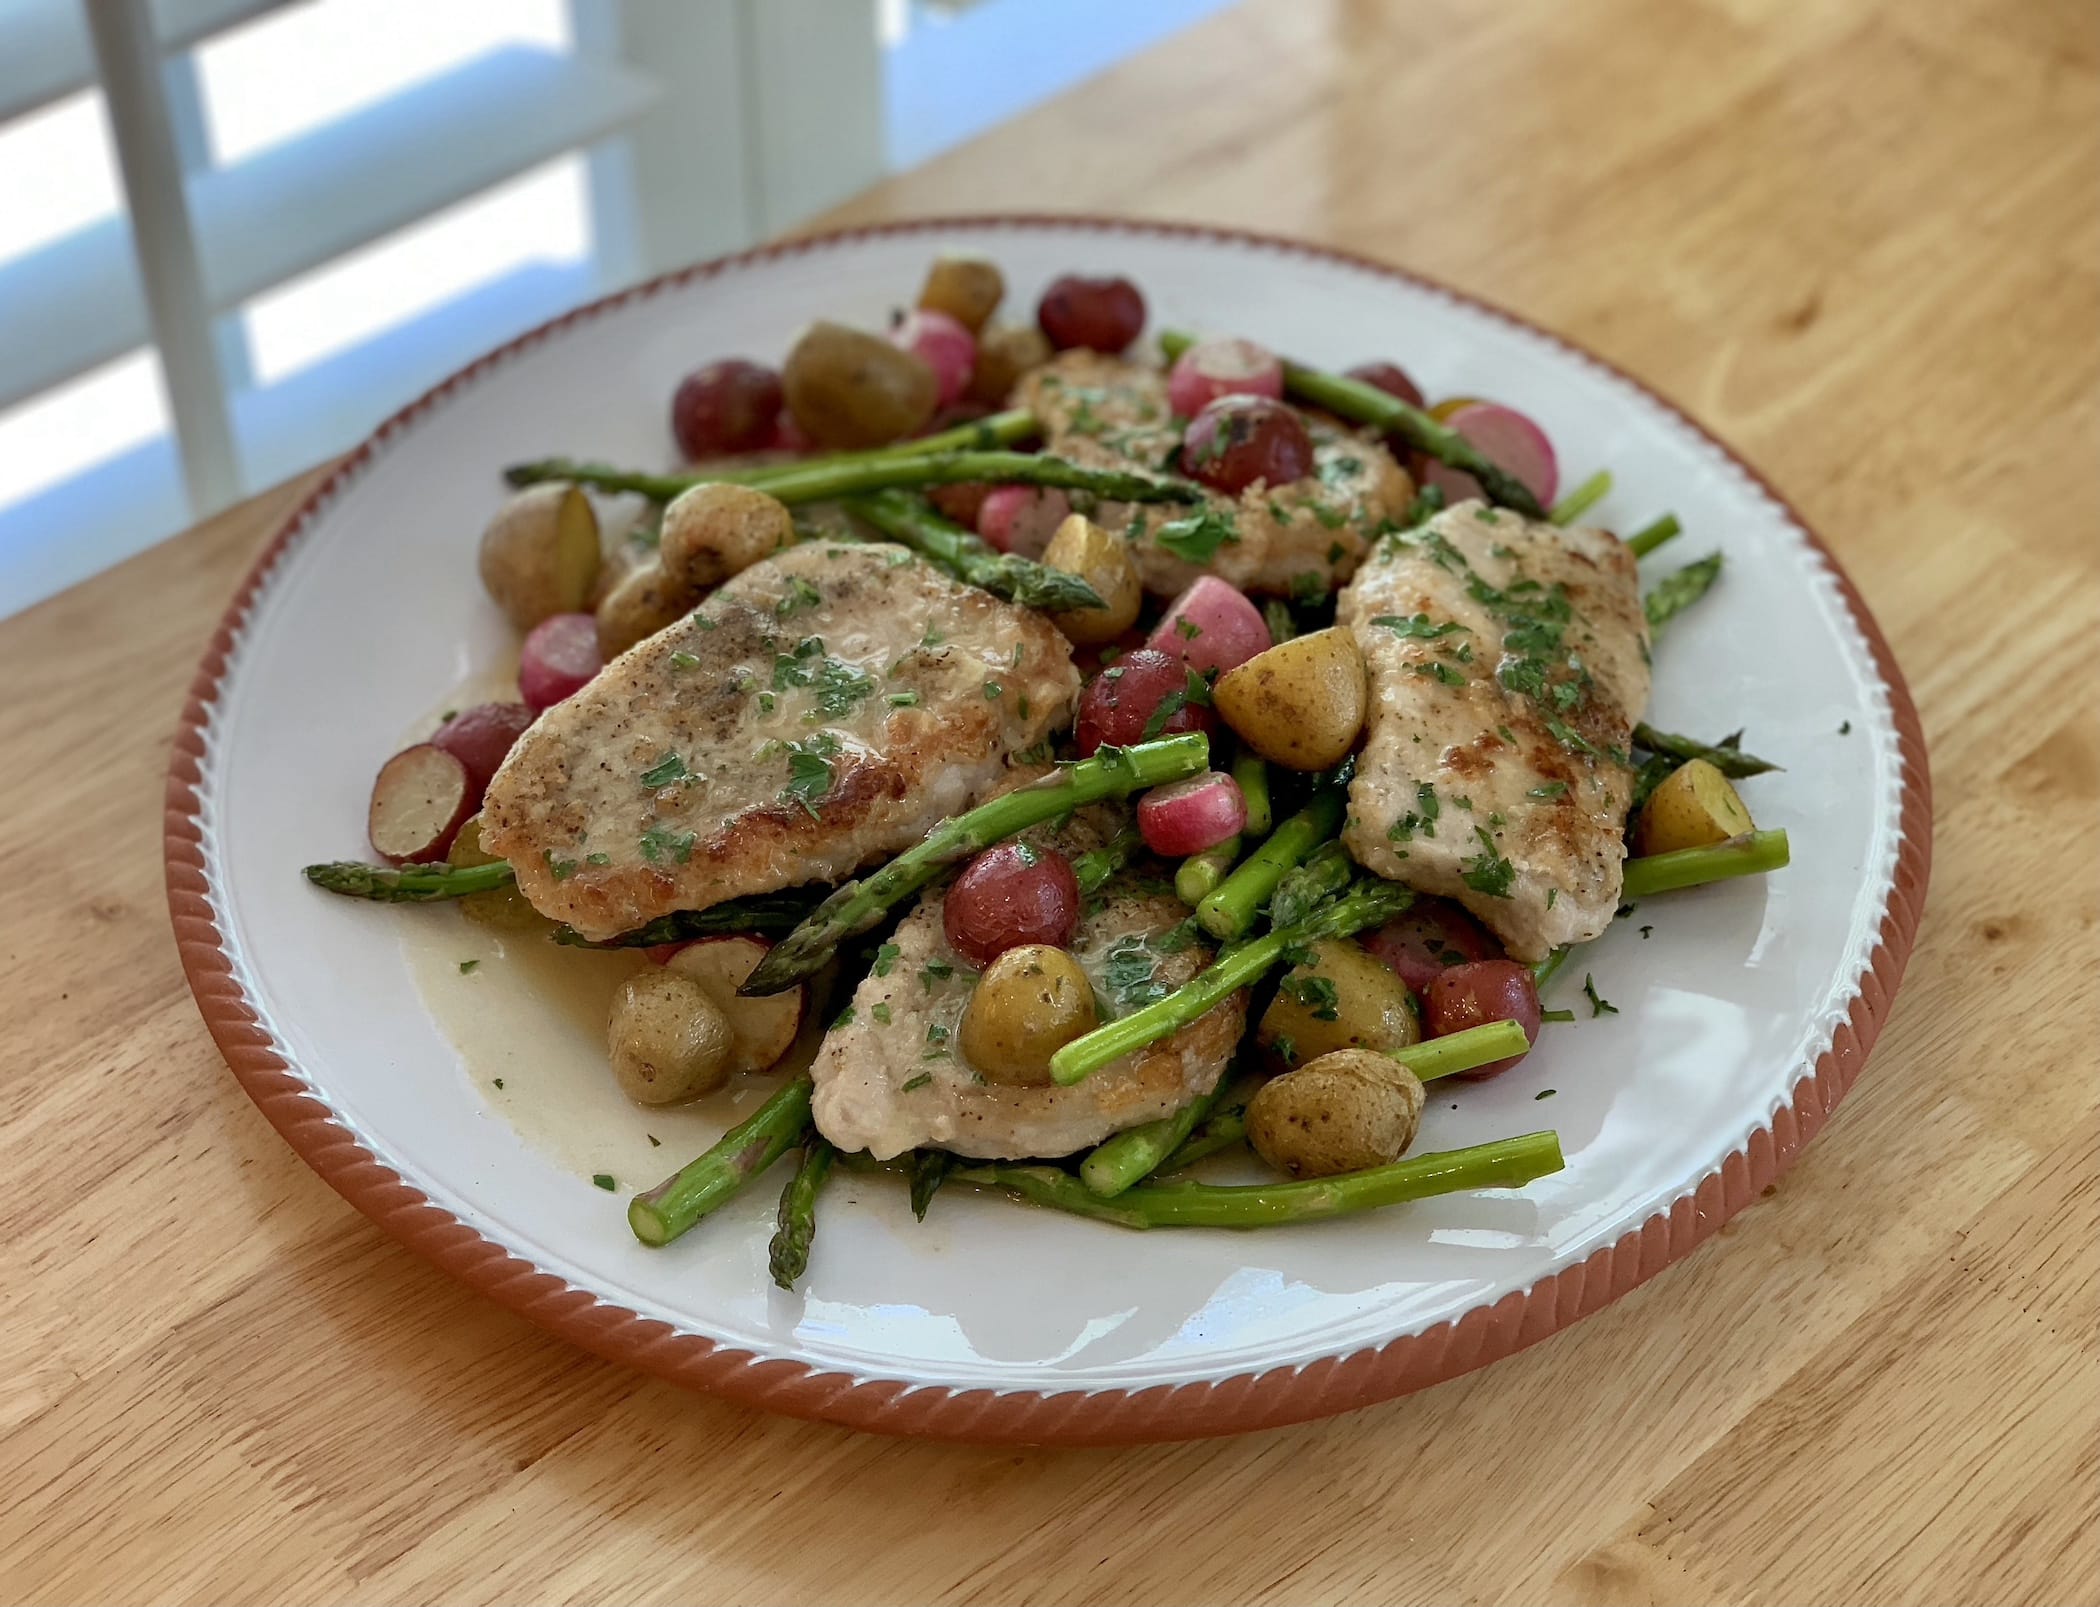 Thinly sliced pork chops teamed with baby potatoes, radishes and asparagus in a yummy anchovy butter sauce.